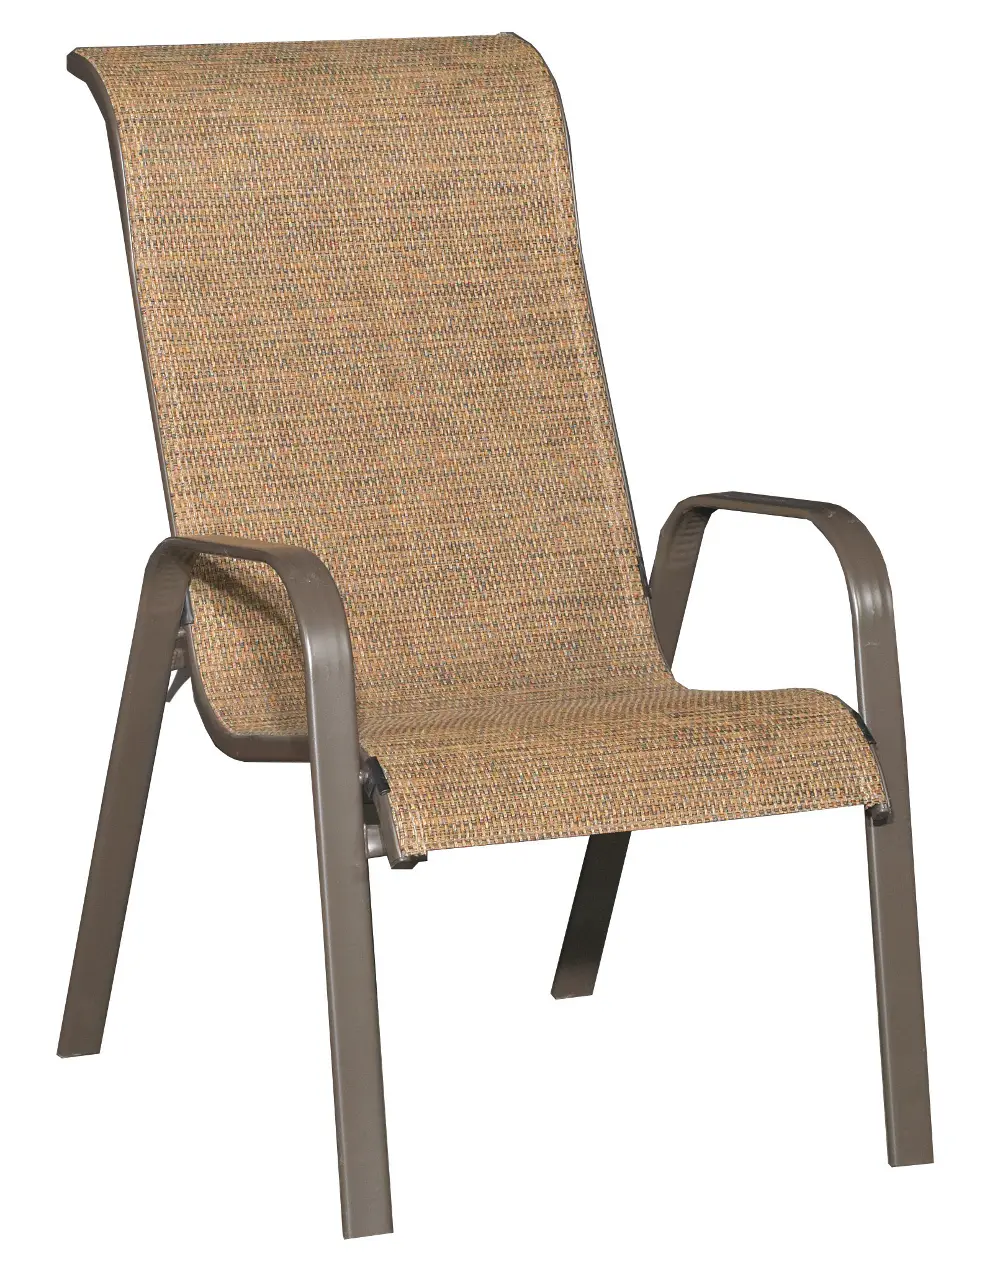 Outdoor Patio Dining Chair - Mayfield-1